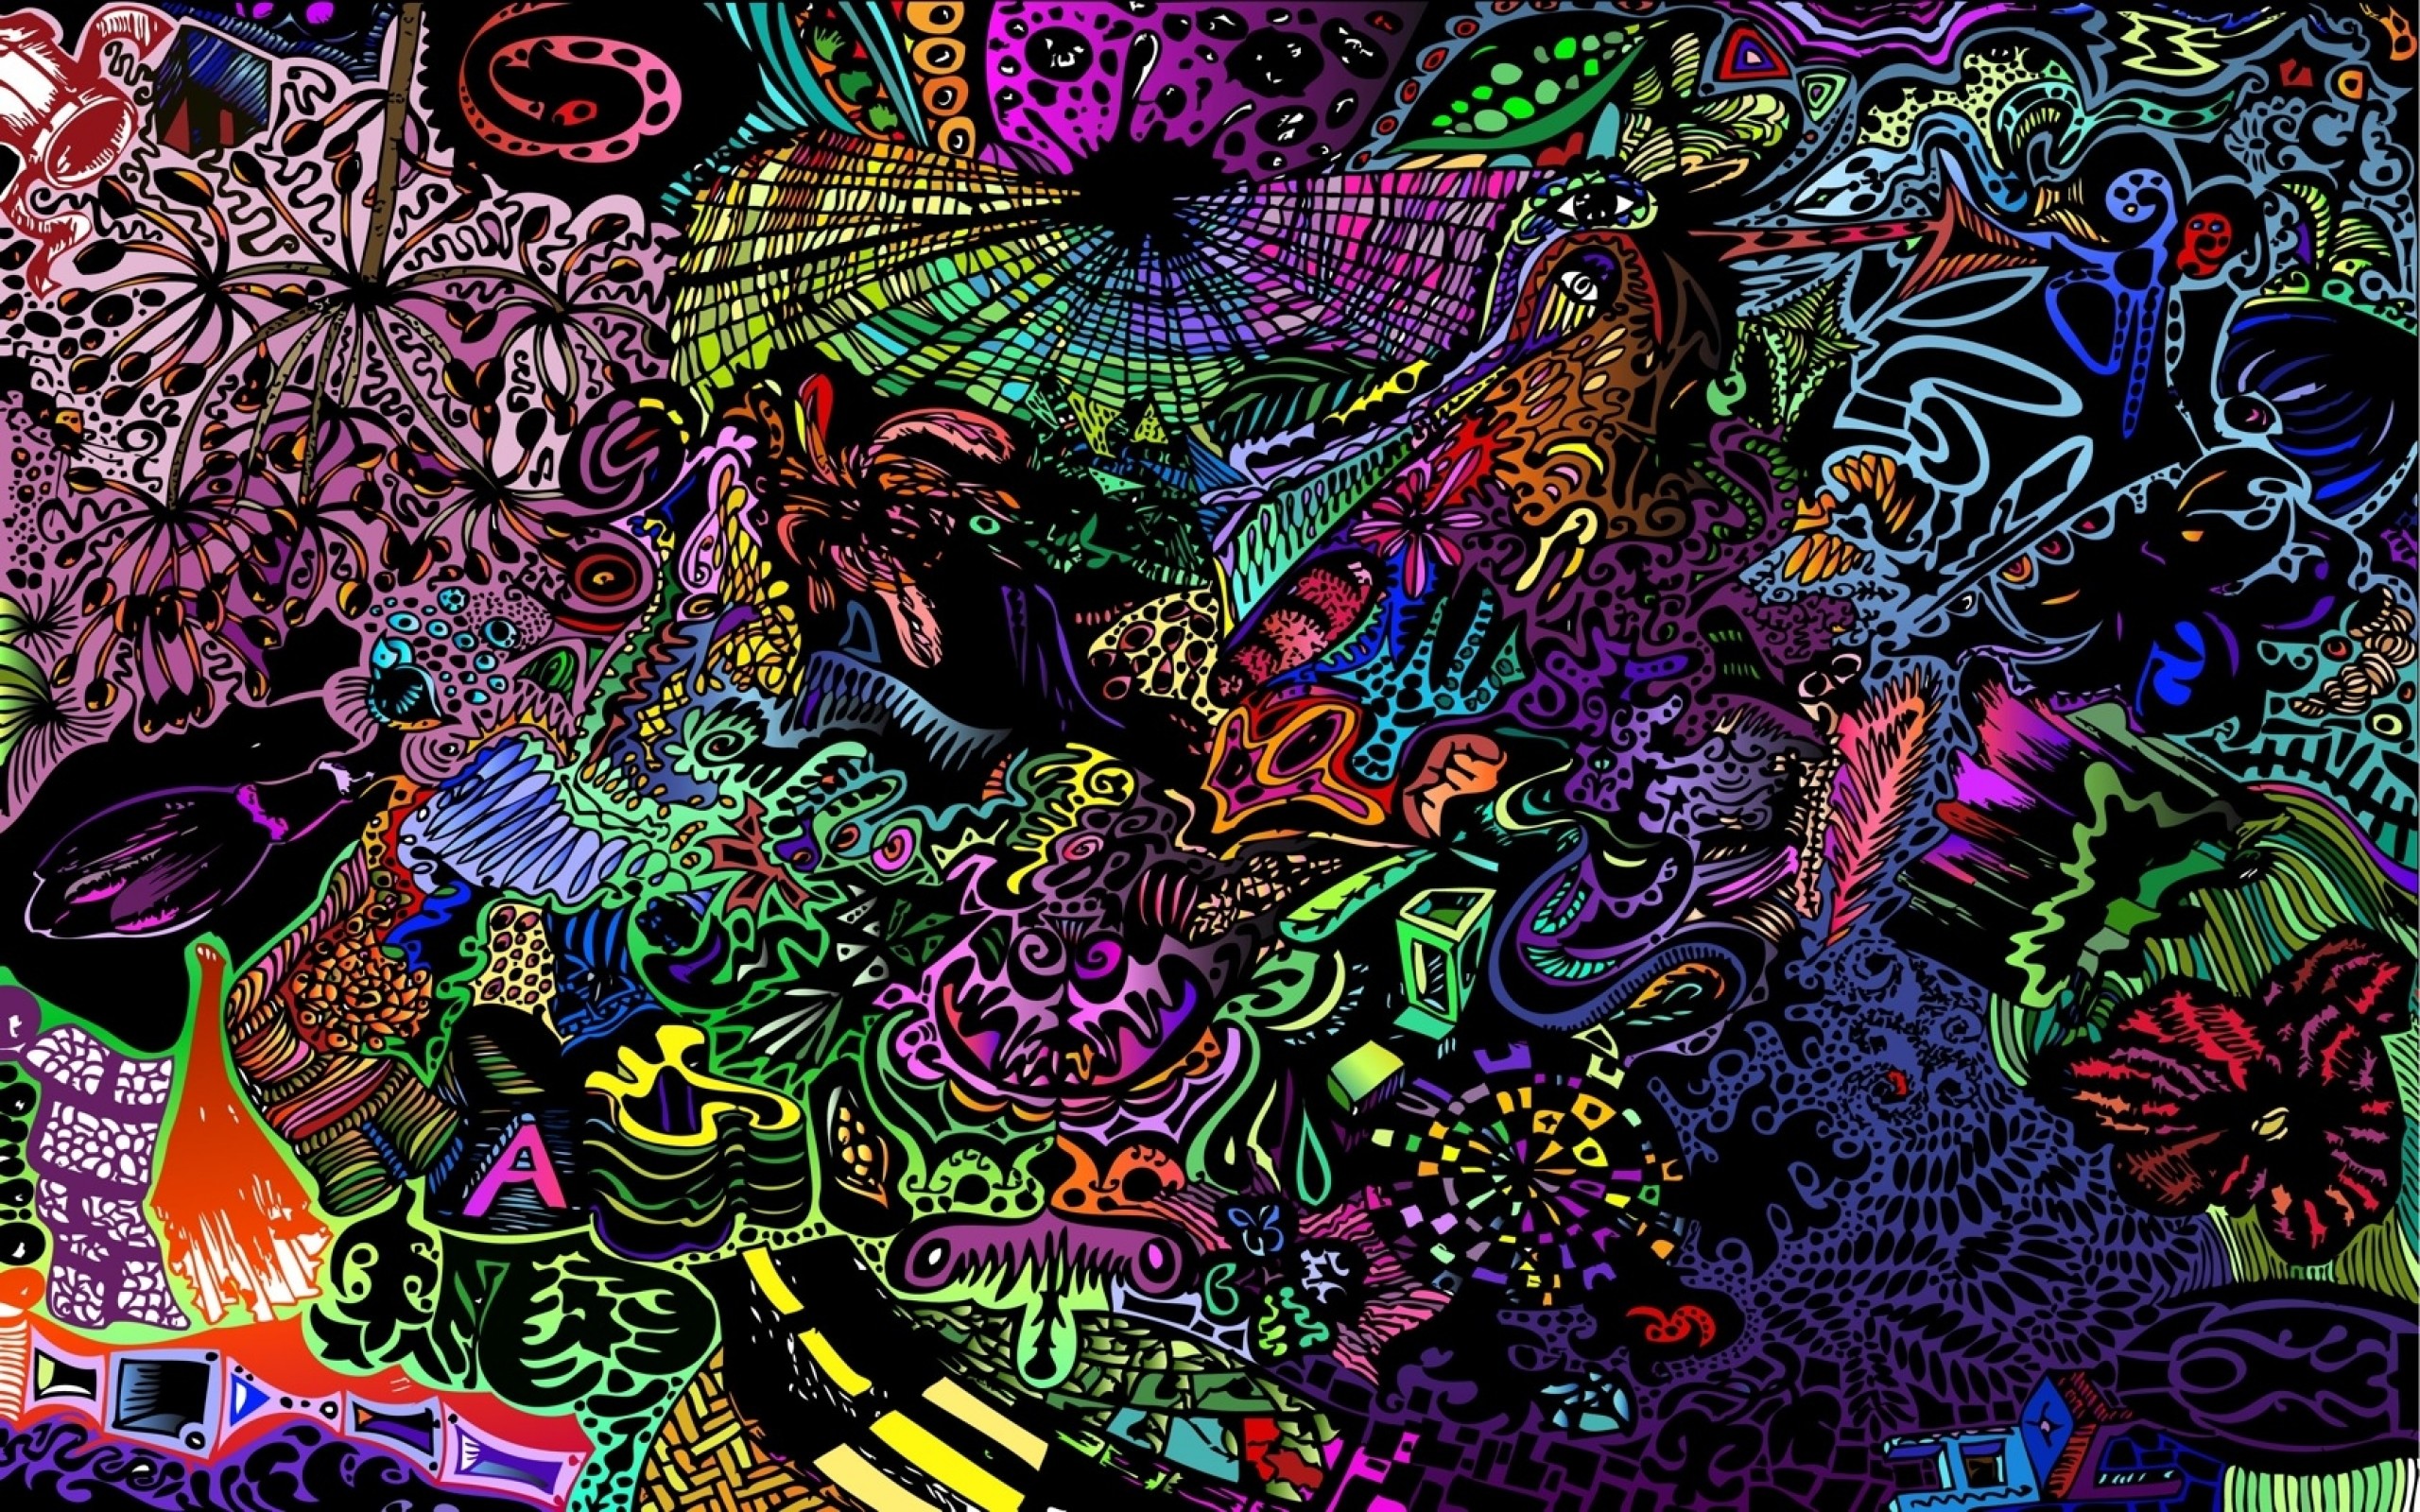 Treanding trippy wallpaper hd psychedelic backgrounds for iphone